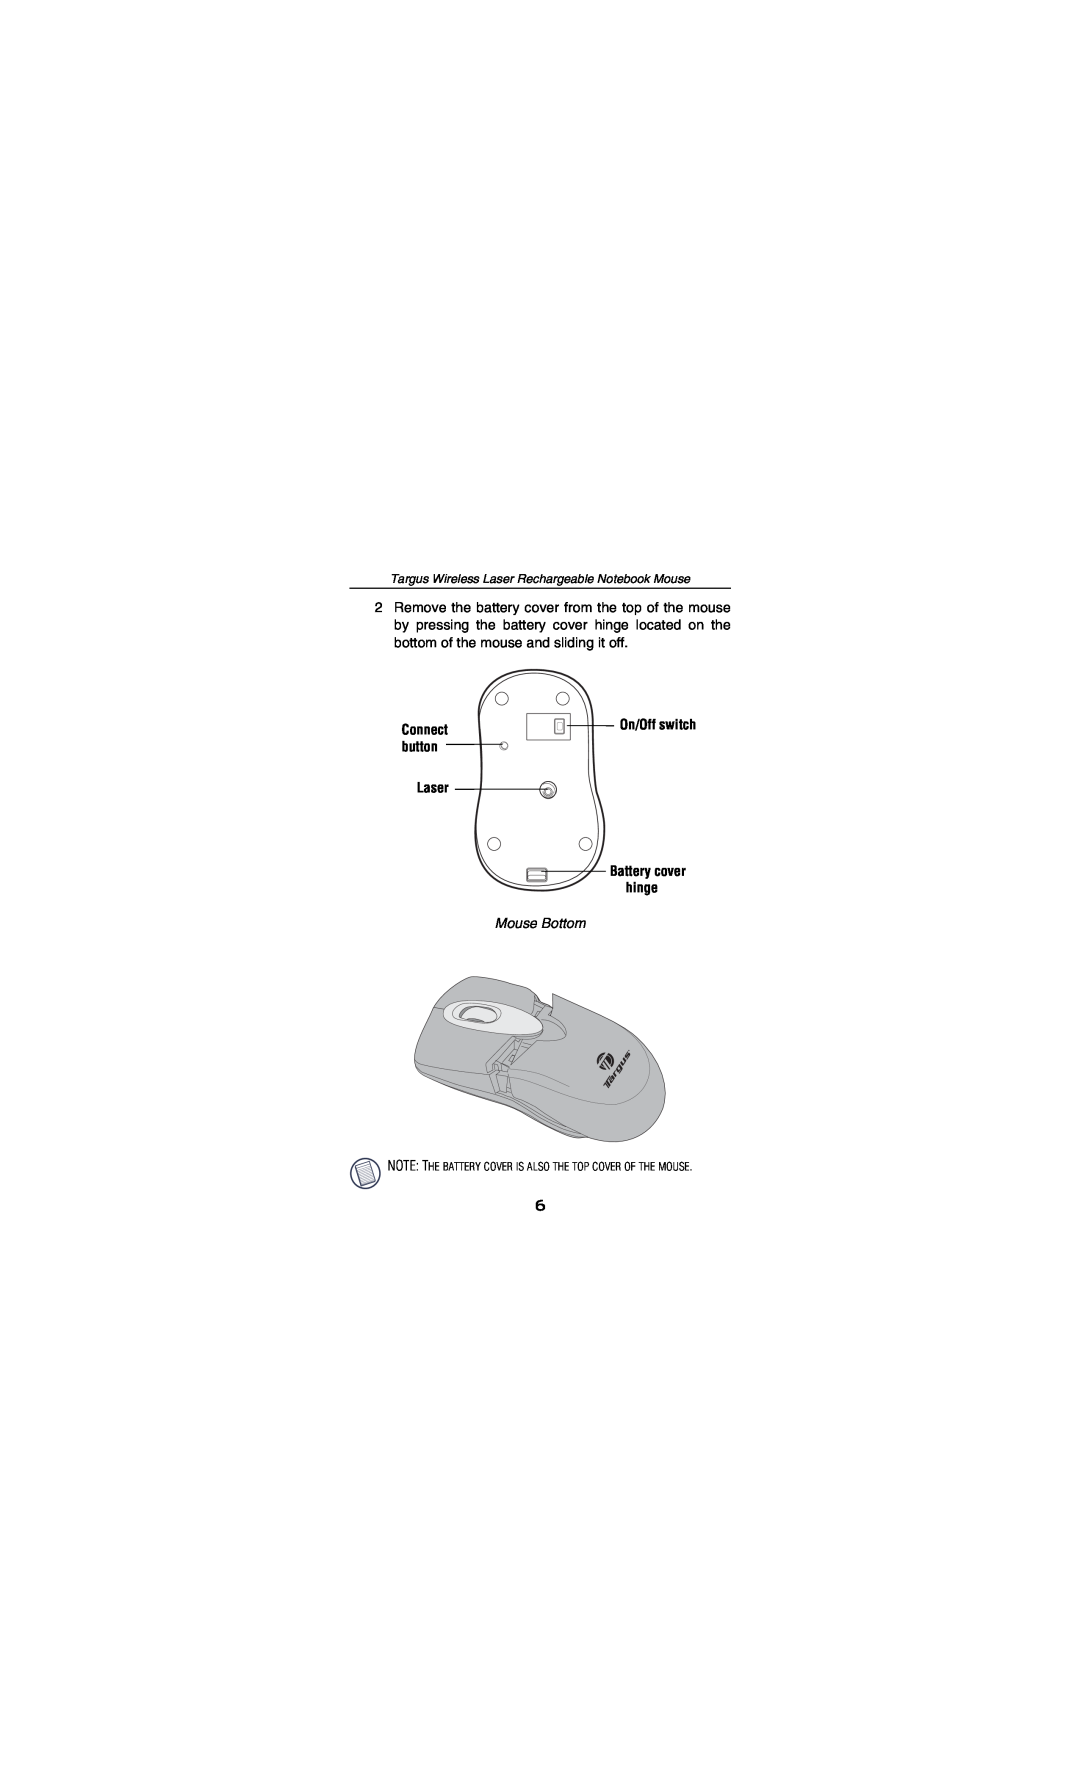 Targus AMW15EU On/Off switch, Mouse Bottom, Connect button, Targus Wireless Laser Rechargeable Notebook Mouse 